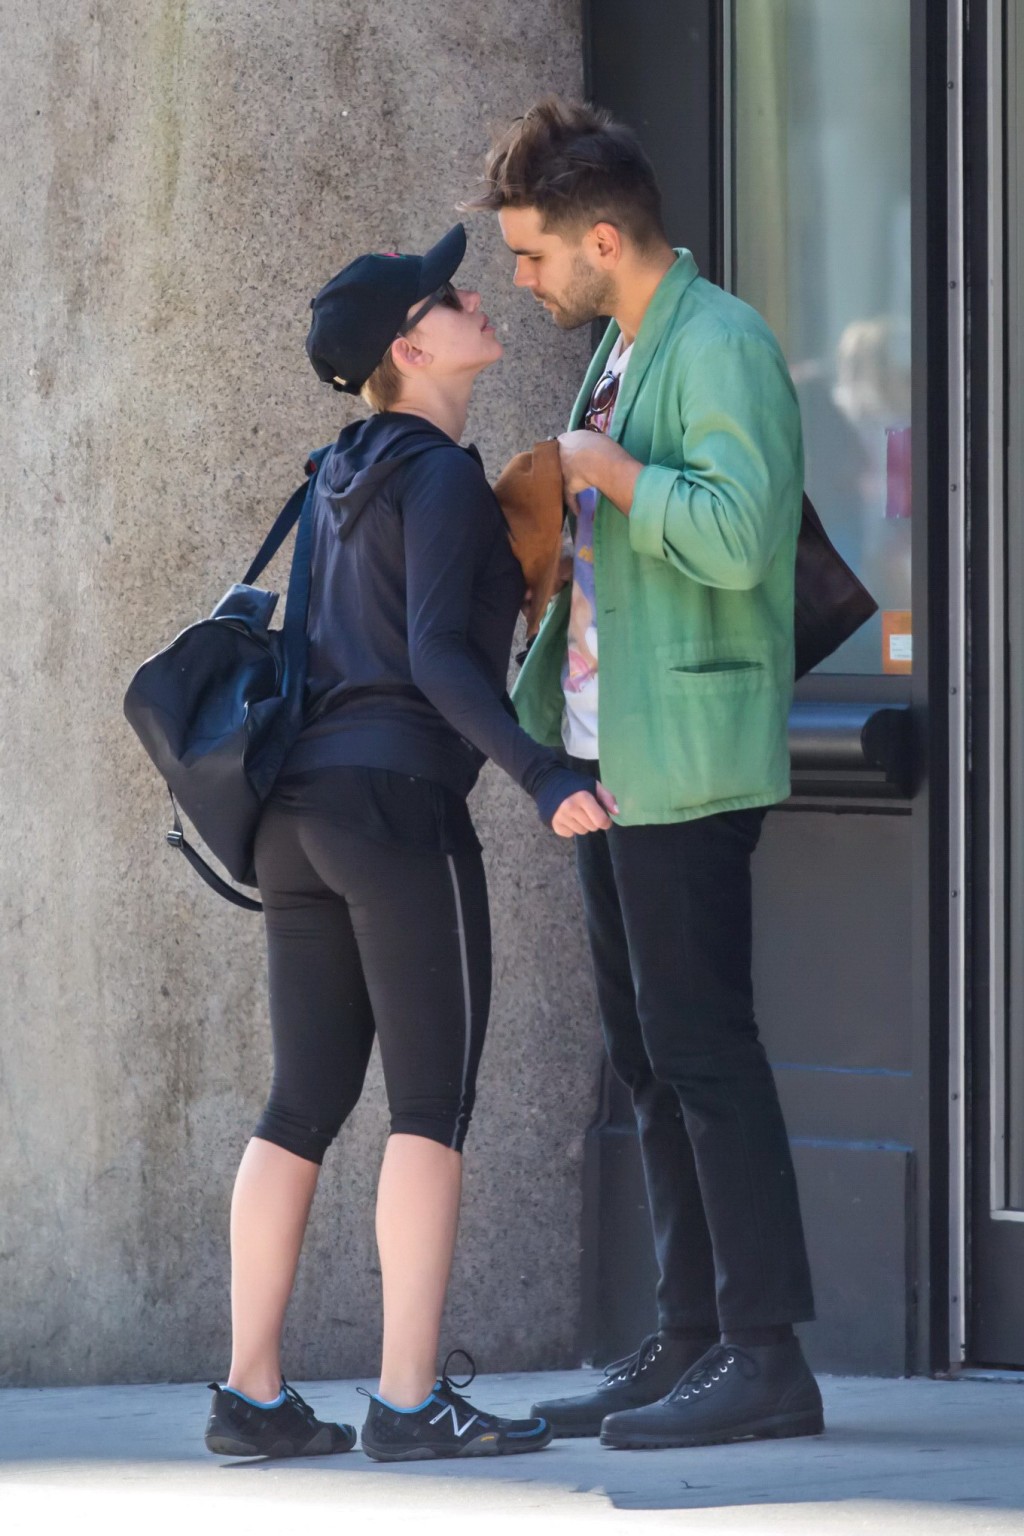 Scarlett Johansson in black leggings getting ass groped while make out in NYC #75183999